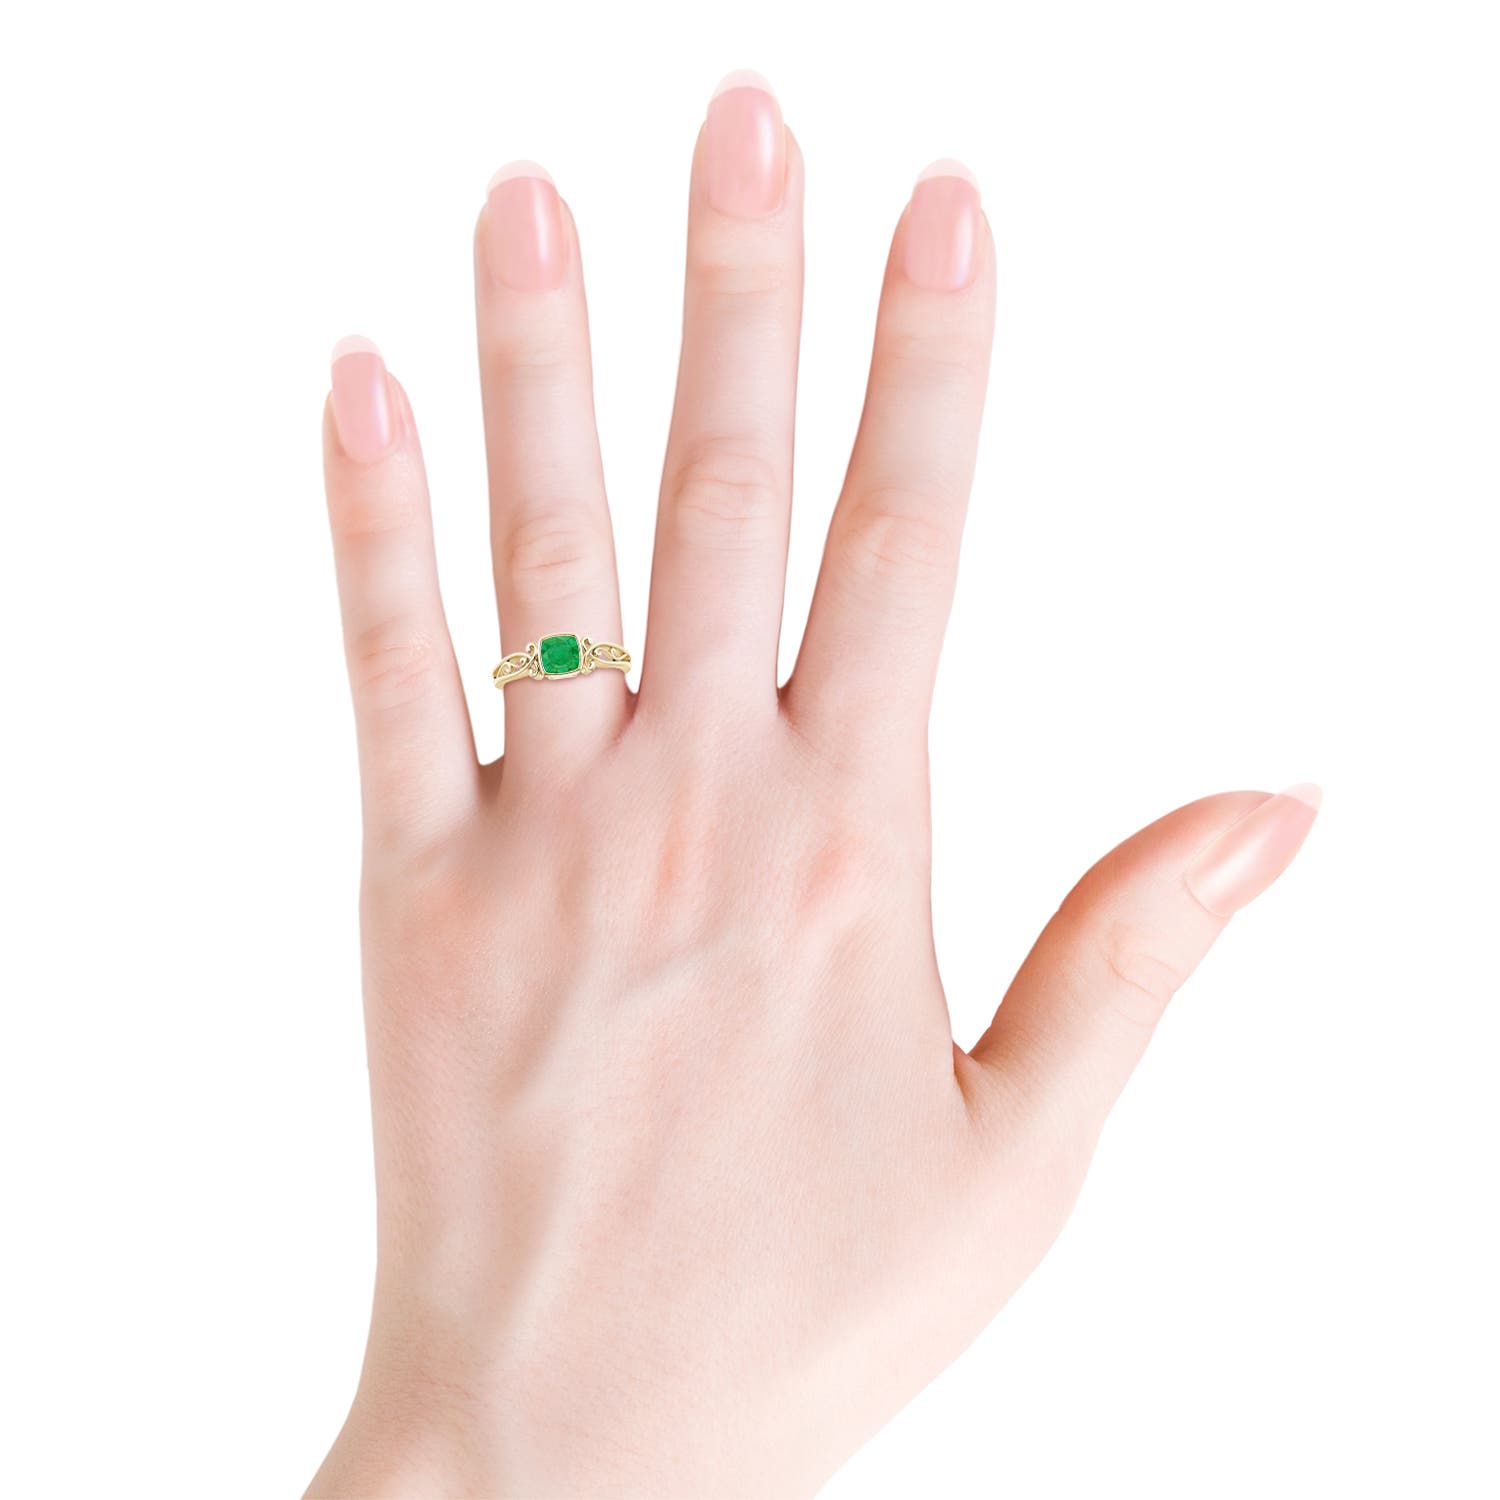 AA - Emerald / 0.55 CT / 14 KT Yellow Gold